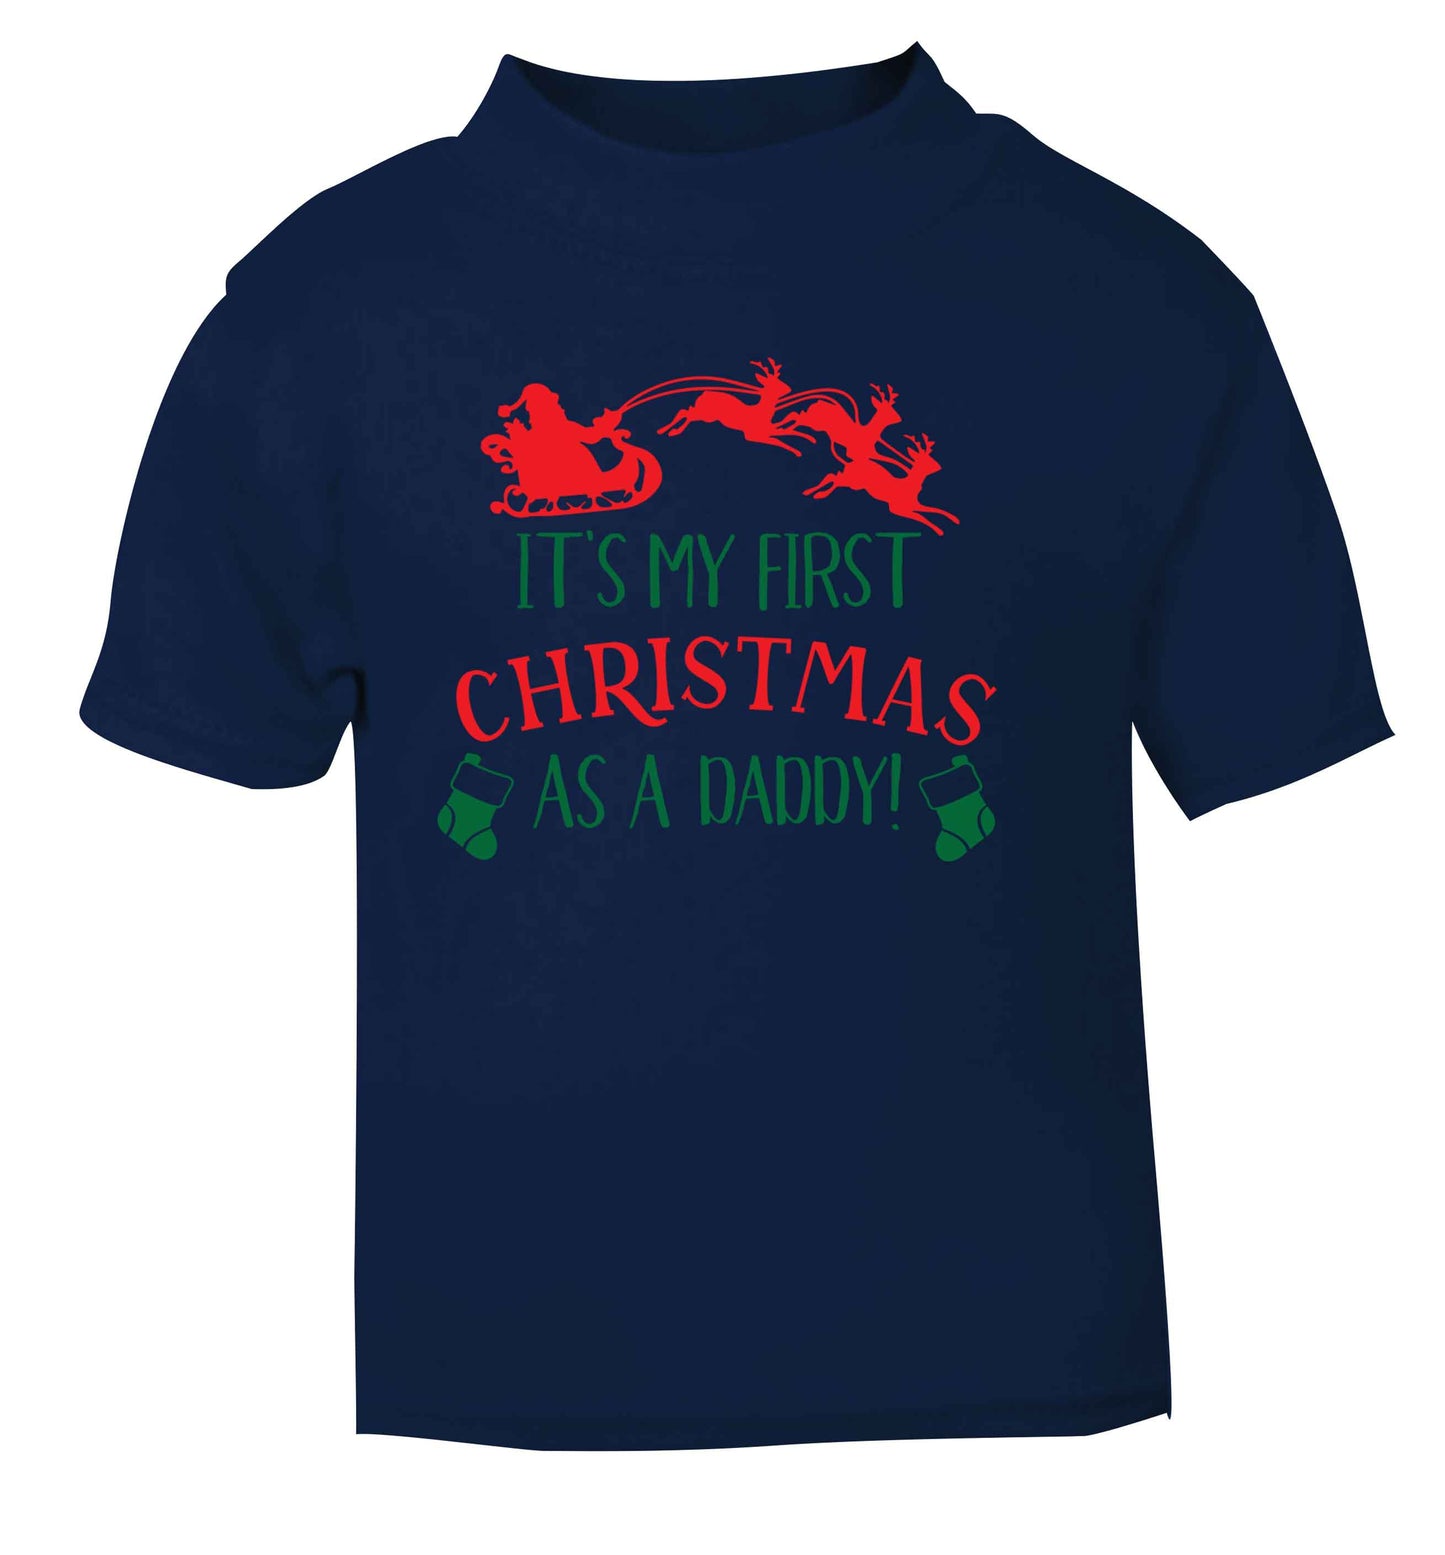 It's my first Christmas as a daddy navy Baby Toddler Tshirt 2 Years